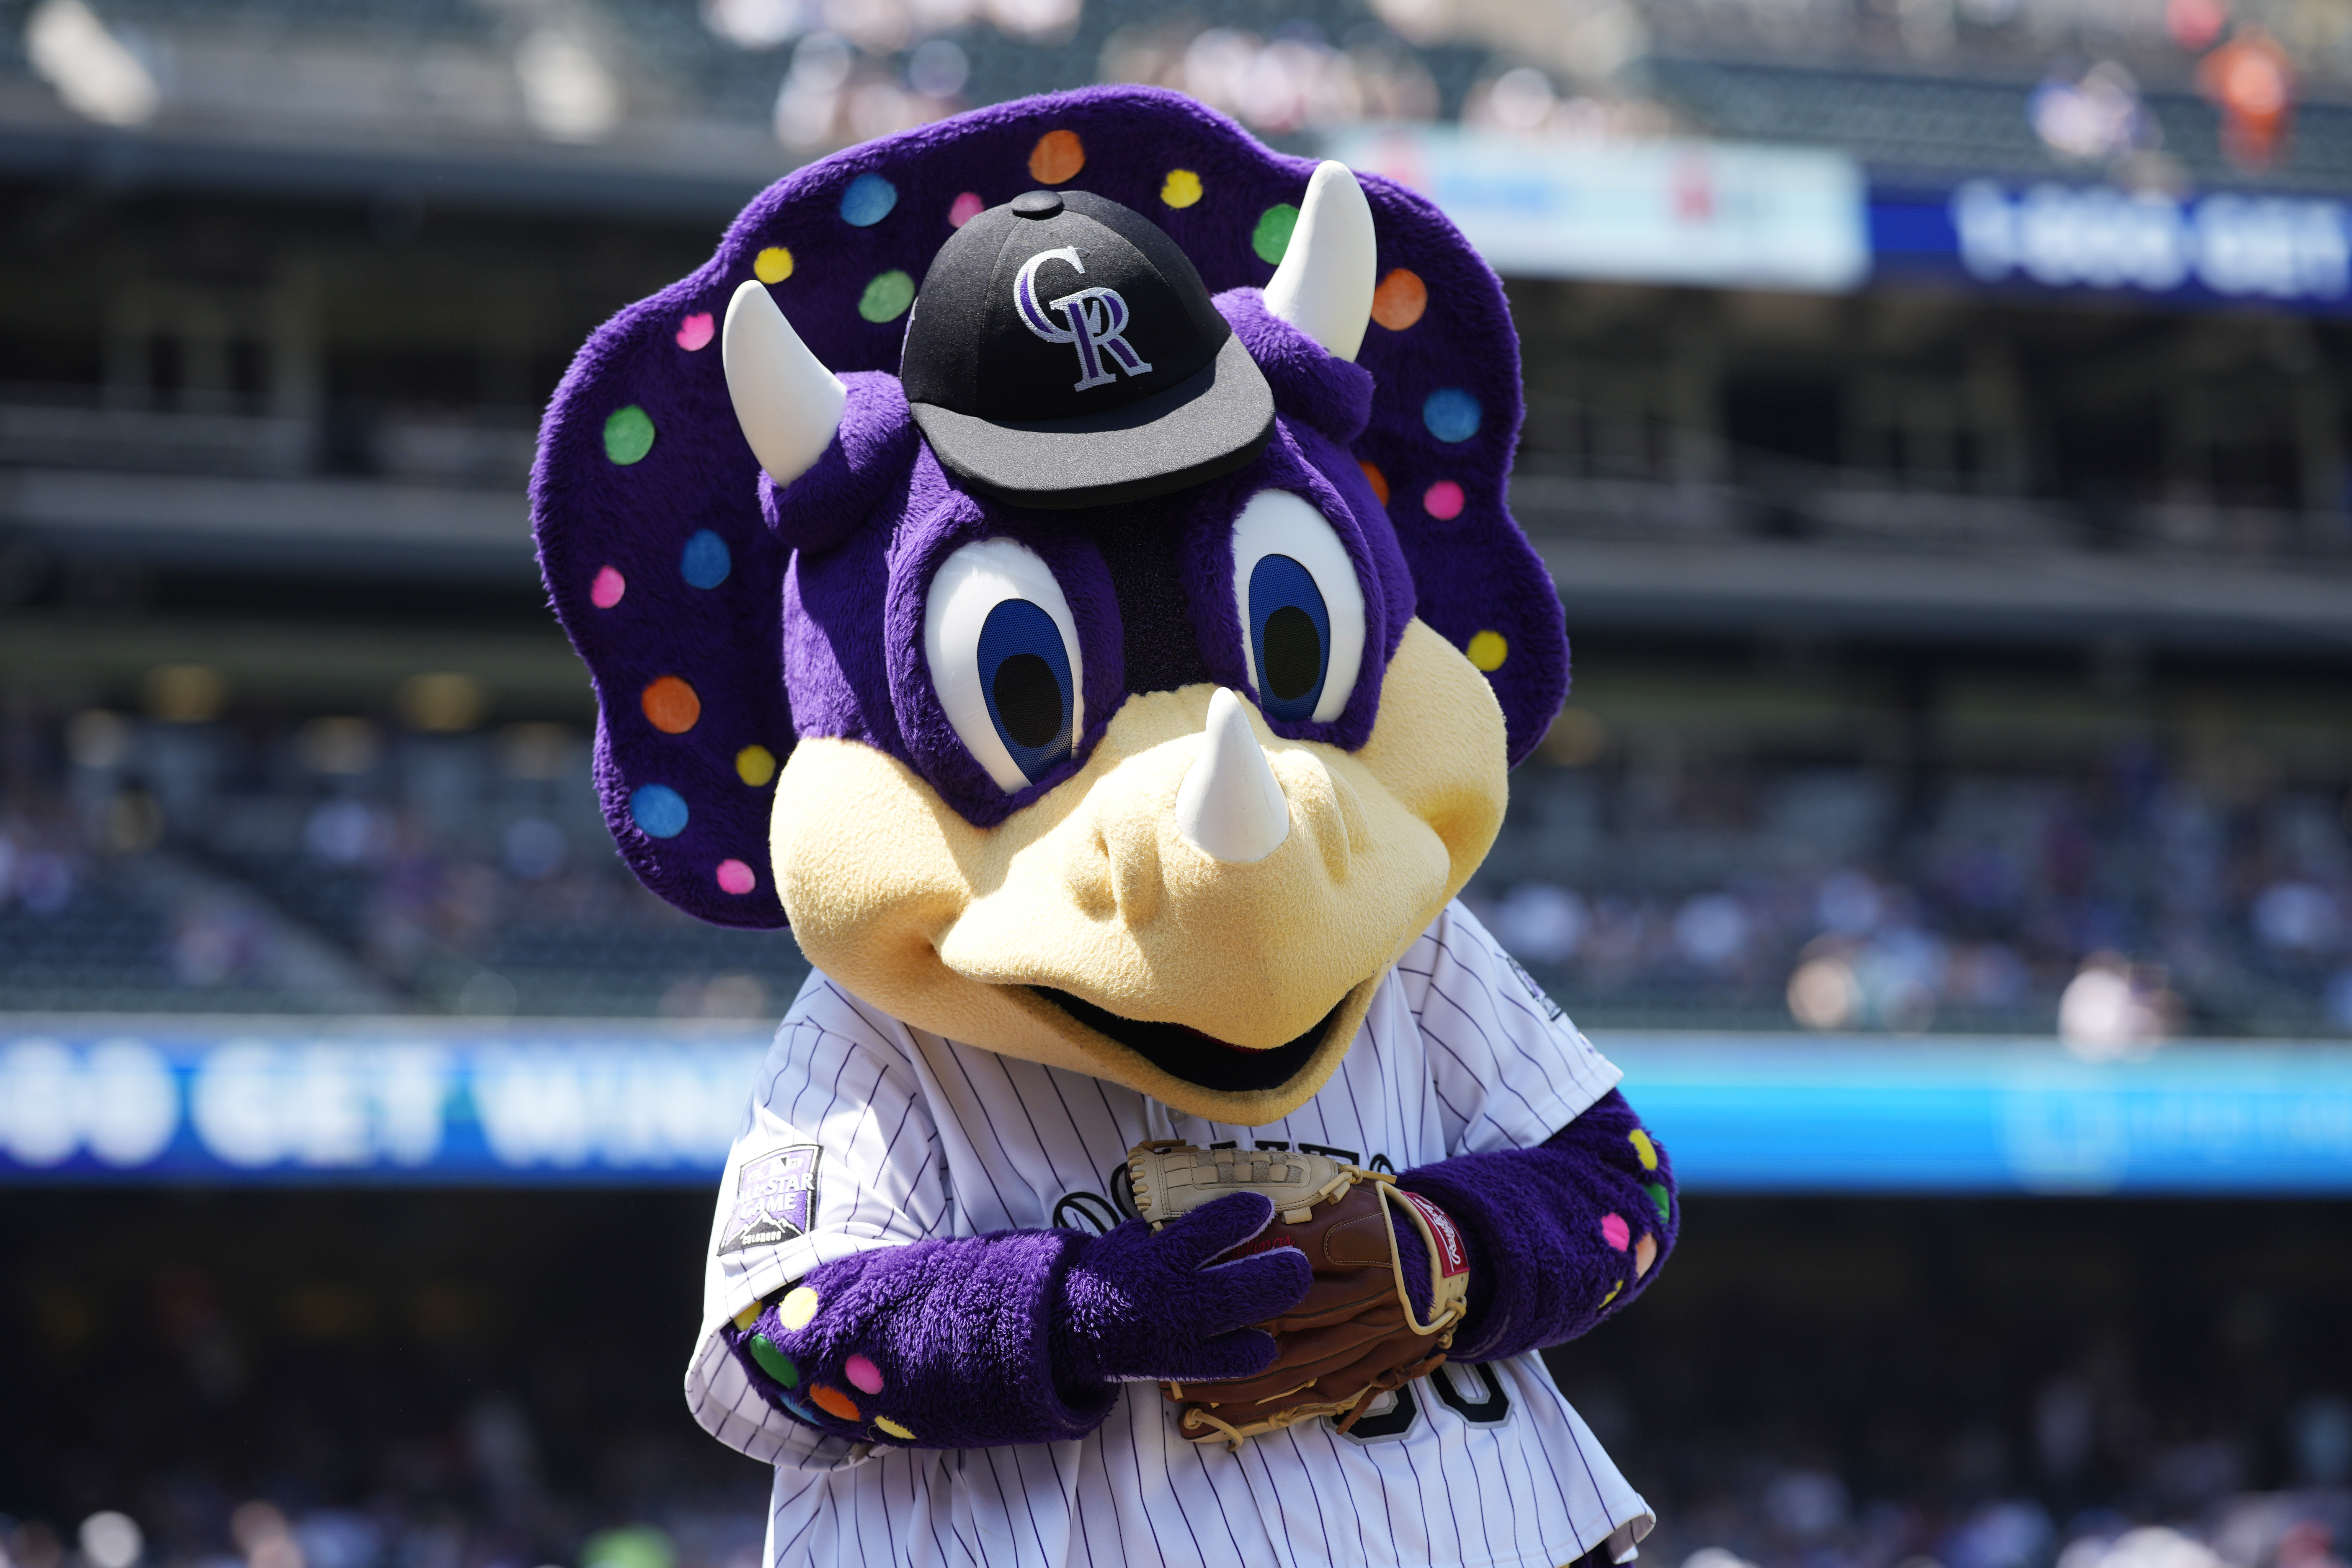 Colorado Rockies - Now let me welcome everybody to the Wild Wild West.